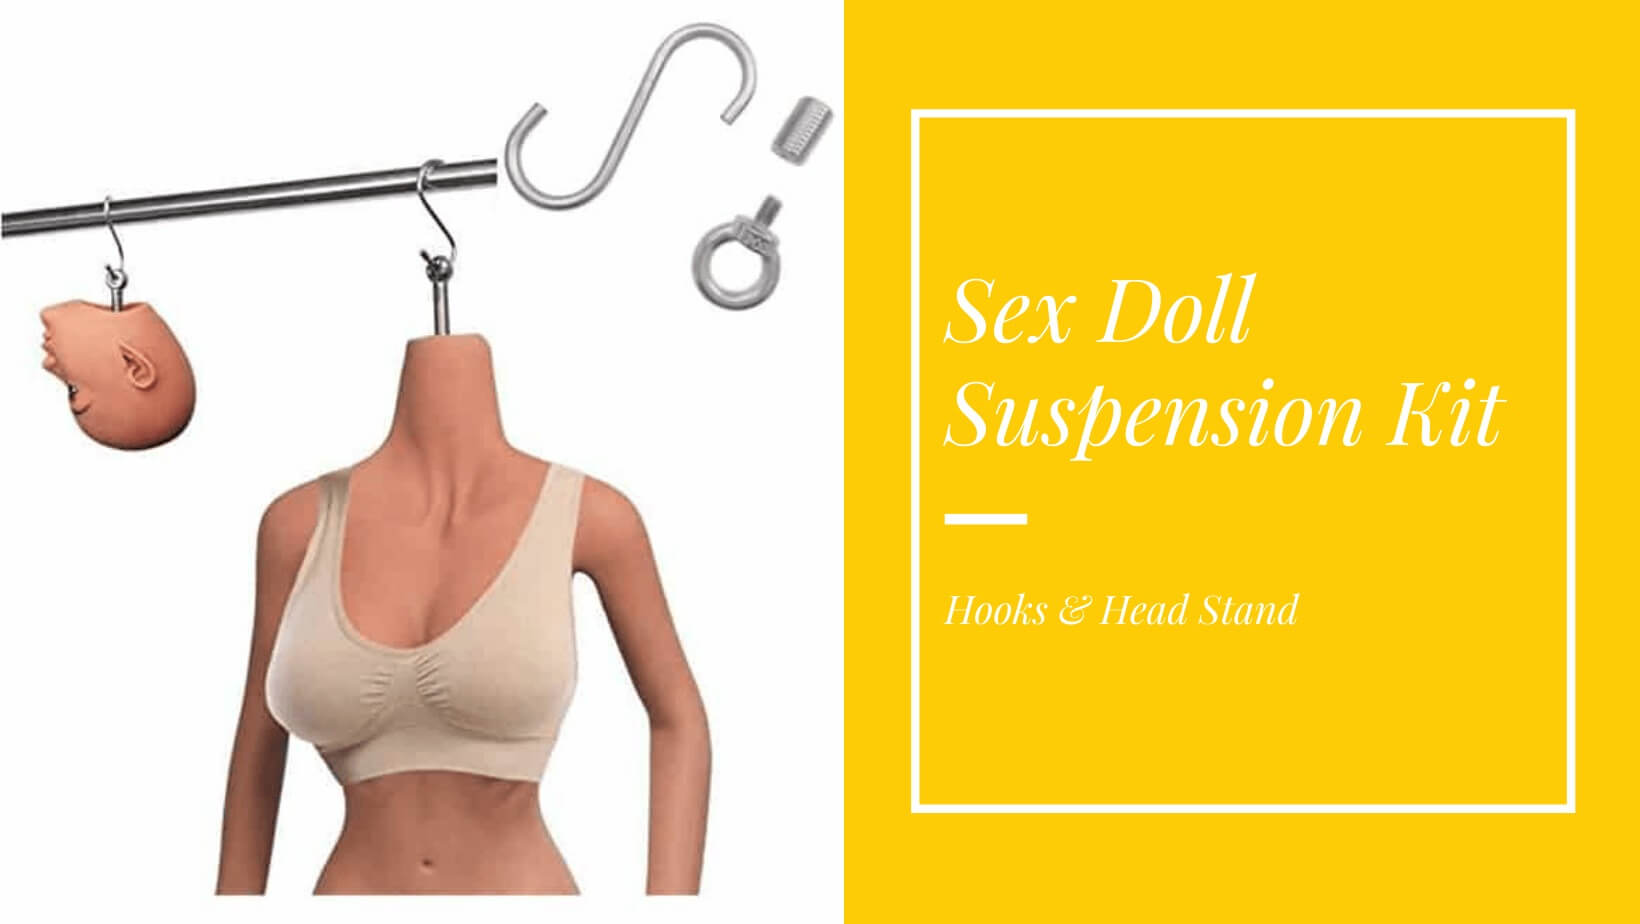 Sex doll suspension kit – Hooks & Head Stand - Tpesexdoll blog